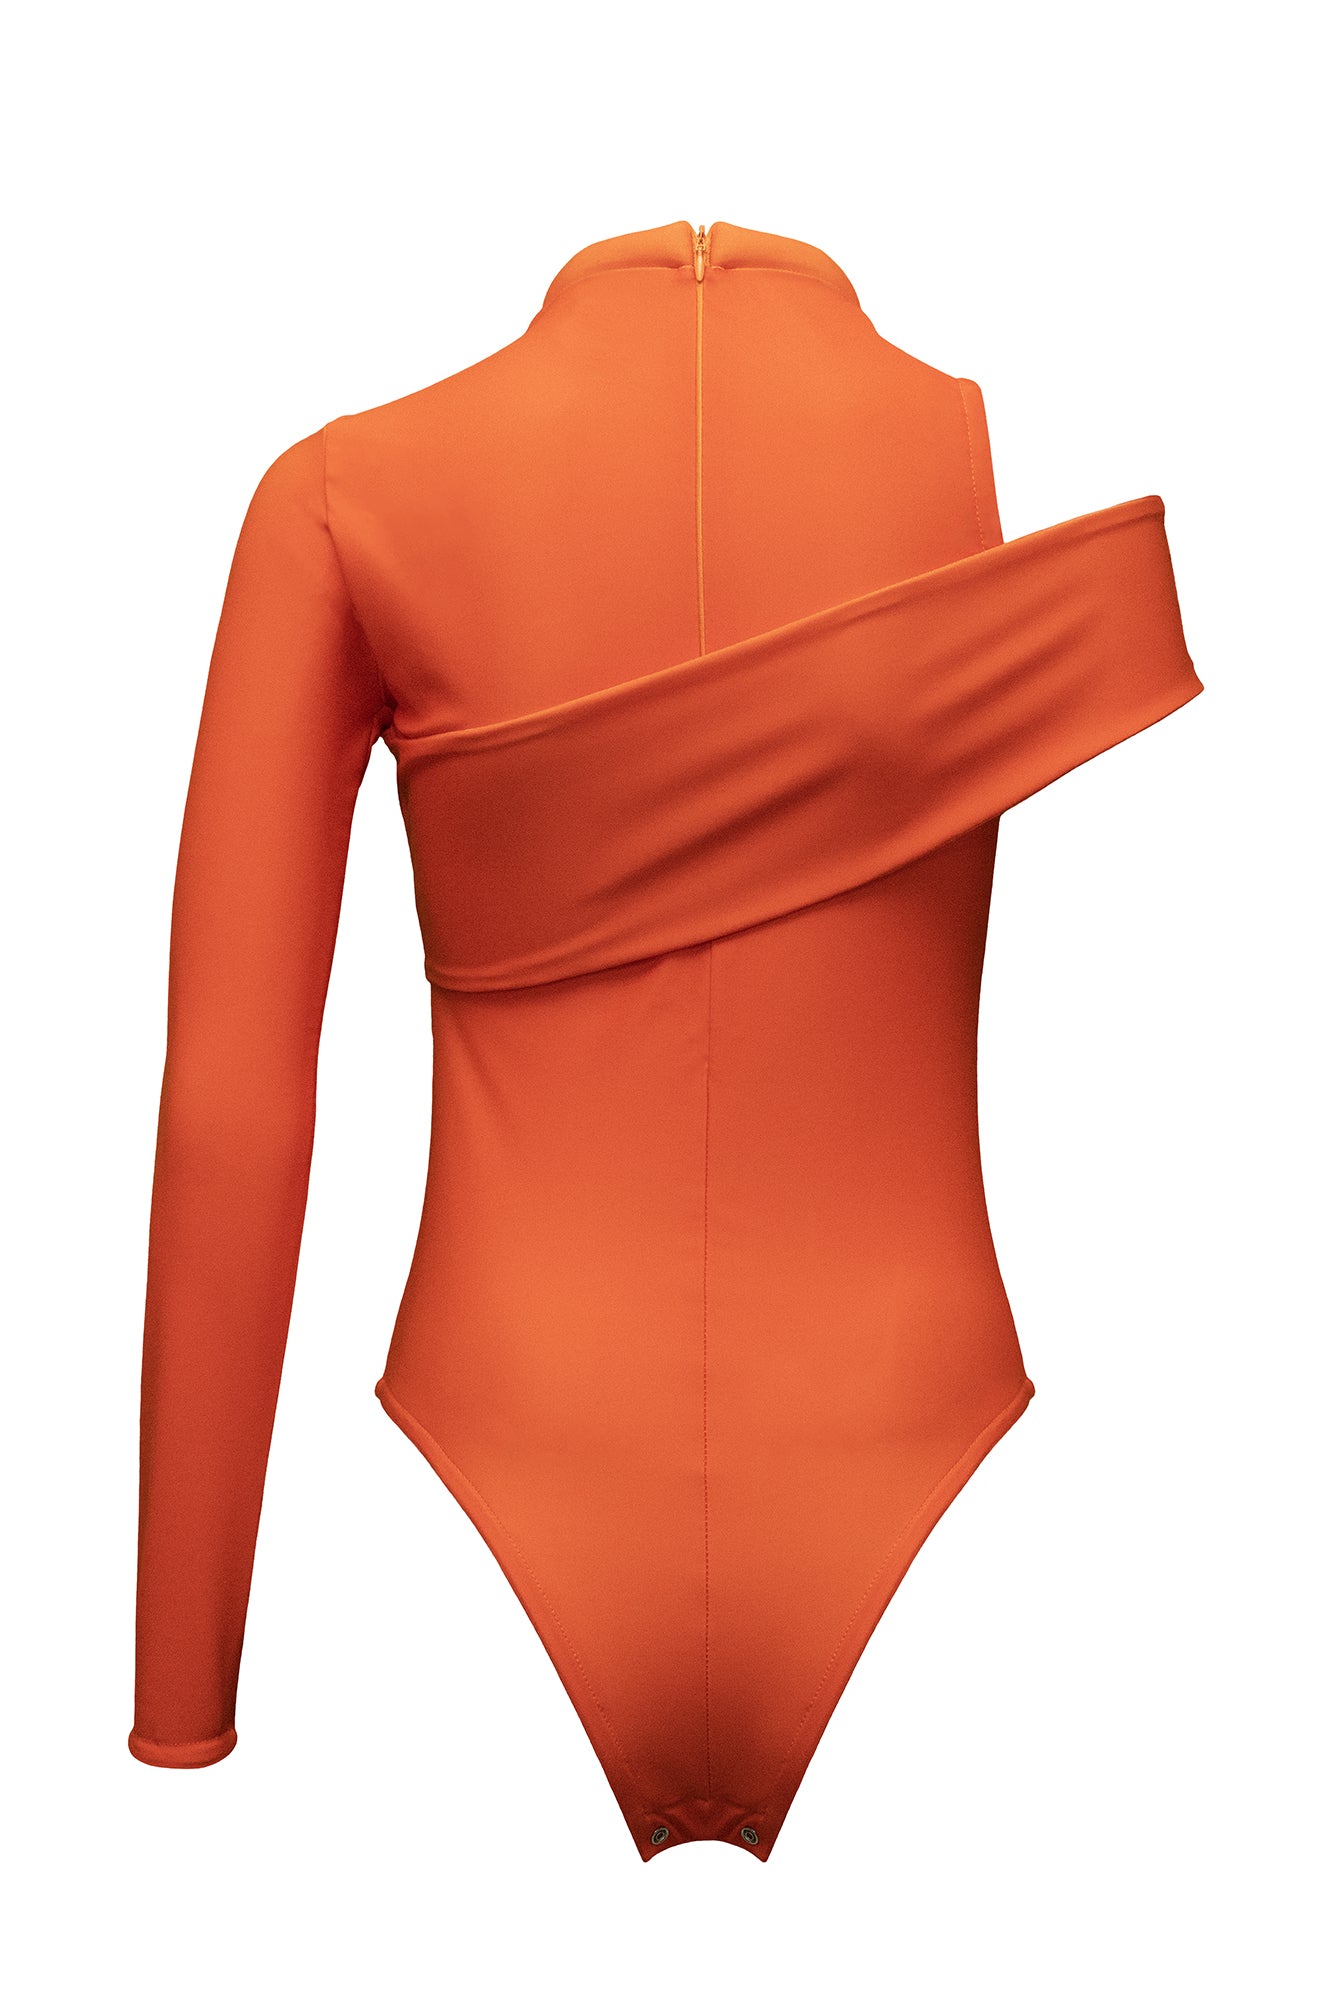 The avant-garde design of the bodysuit Scarlet is with one sleeve, chest detail, a neck rope and embroidery. The elastic material adapts to the body shape and emphasizes its curves. The bodysuit photograph is from the back on a white background where the zip of it is visible.